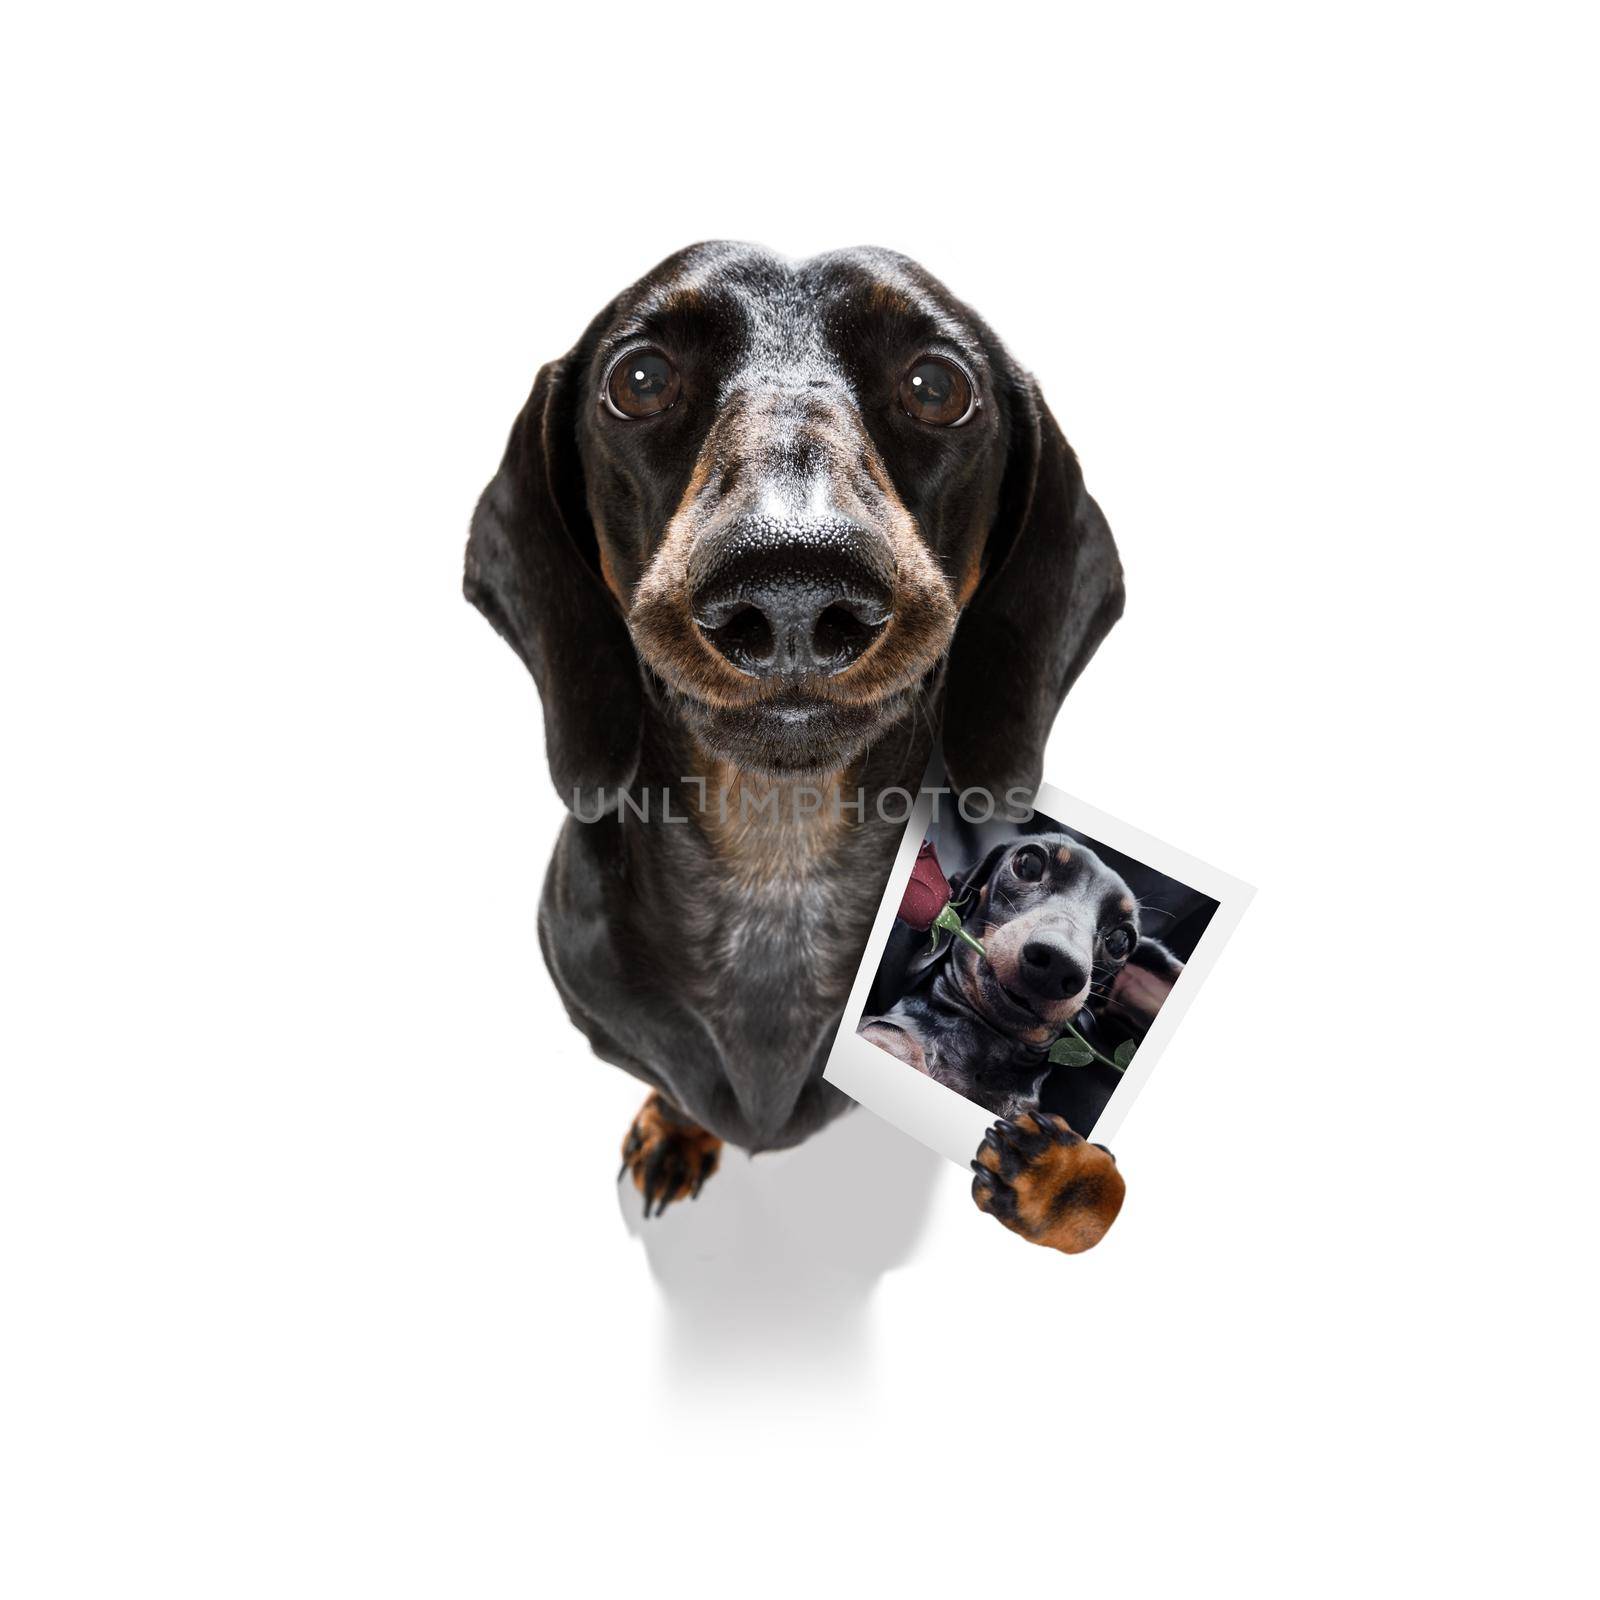 super funny dachshund dog holding a photograph with old retro style look isolated on white background